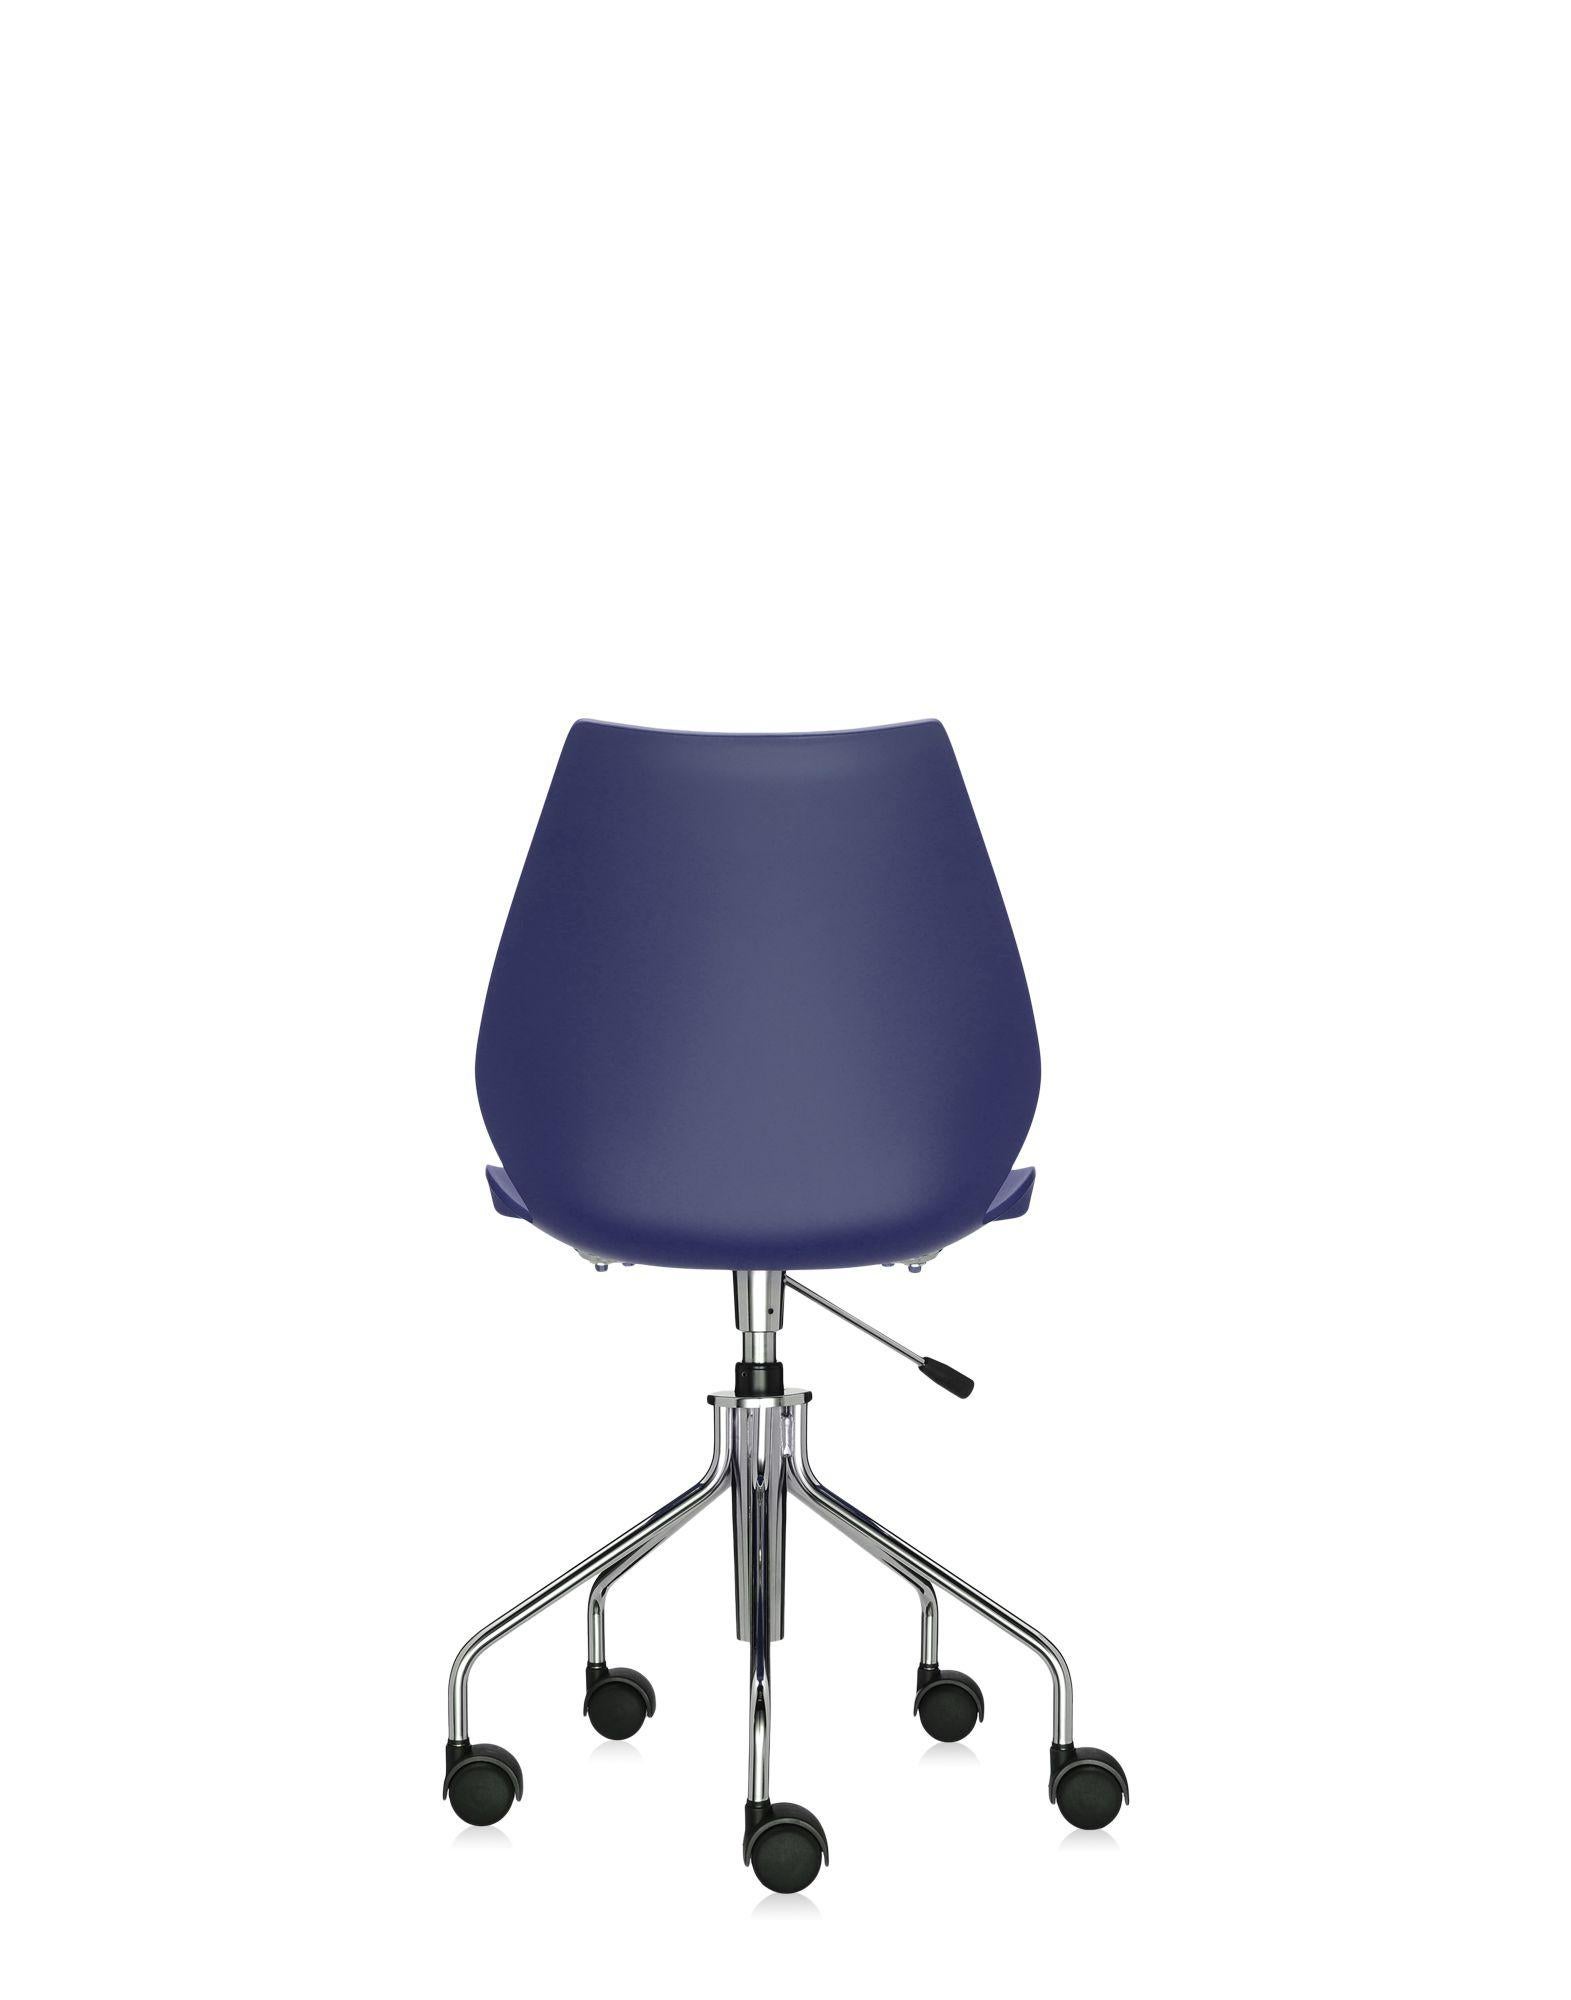 Kartell Maui Swivel Chair Adjustable in Navy Blue by Vico Magistretti 1